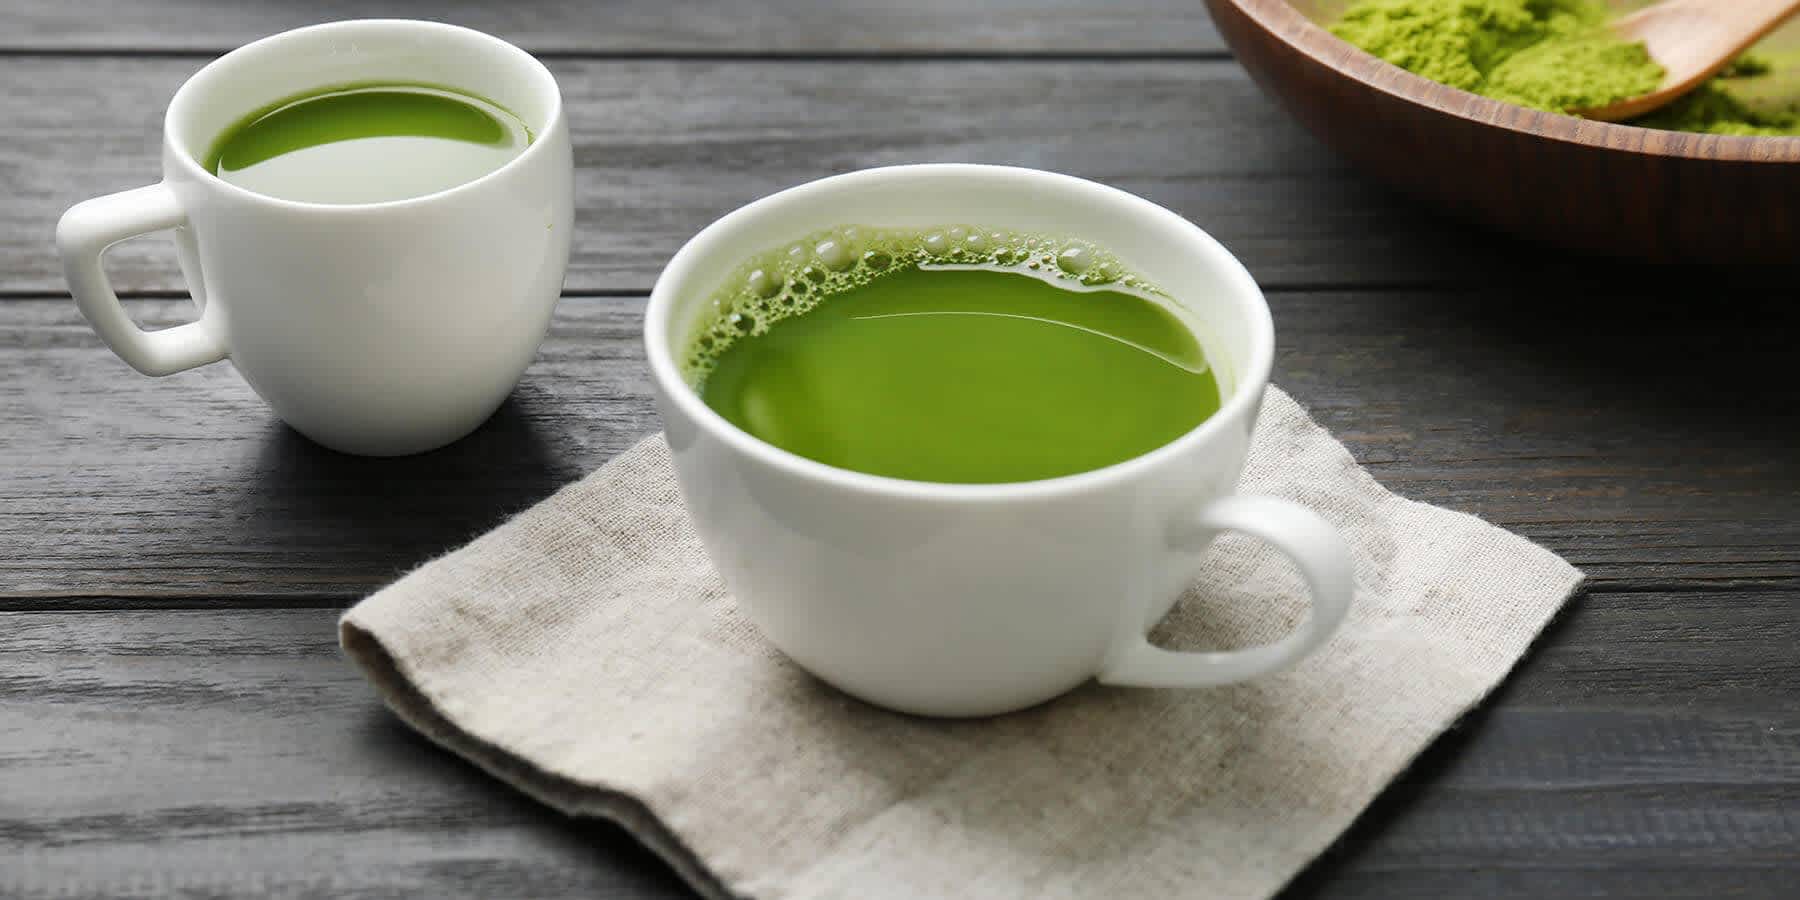 Two cups of matcha tea to help boost metabolism